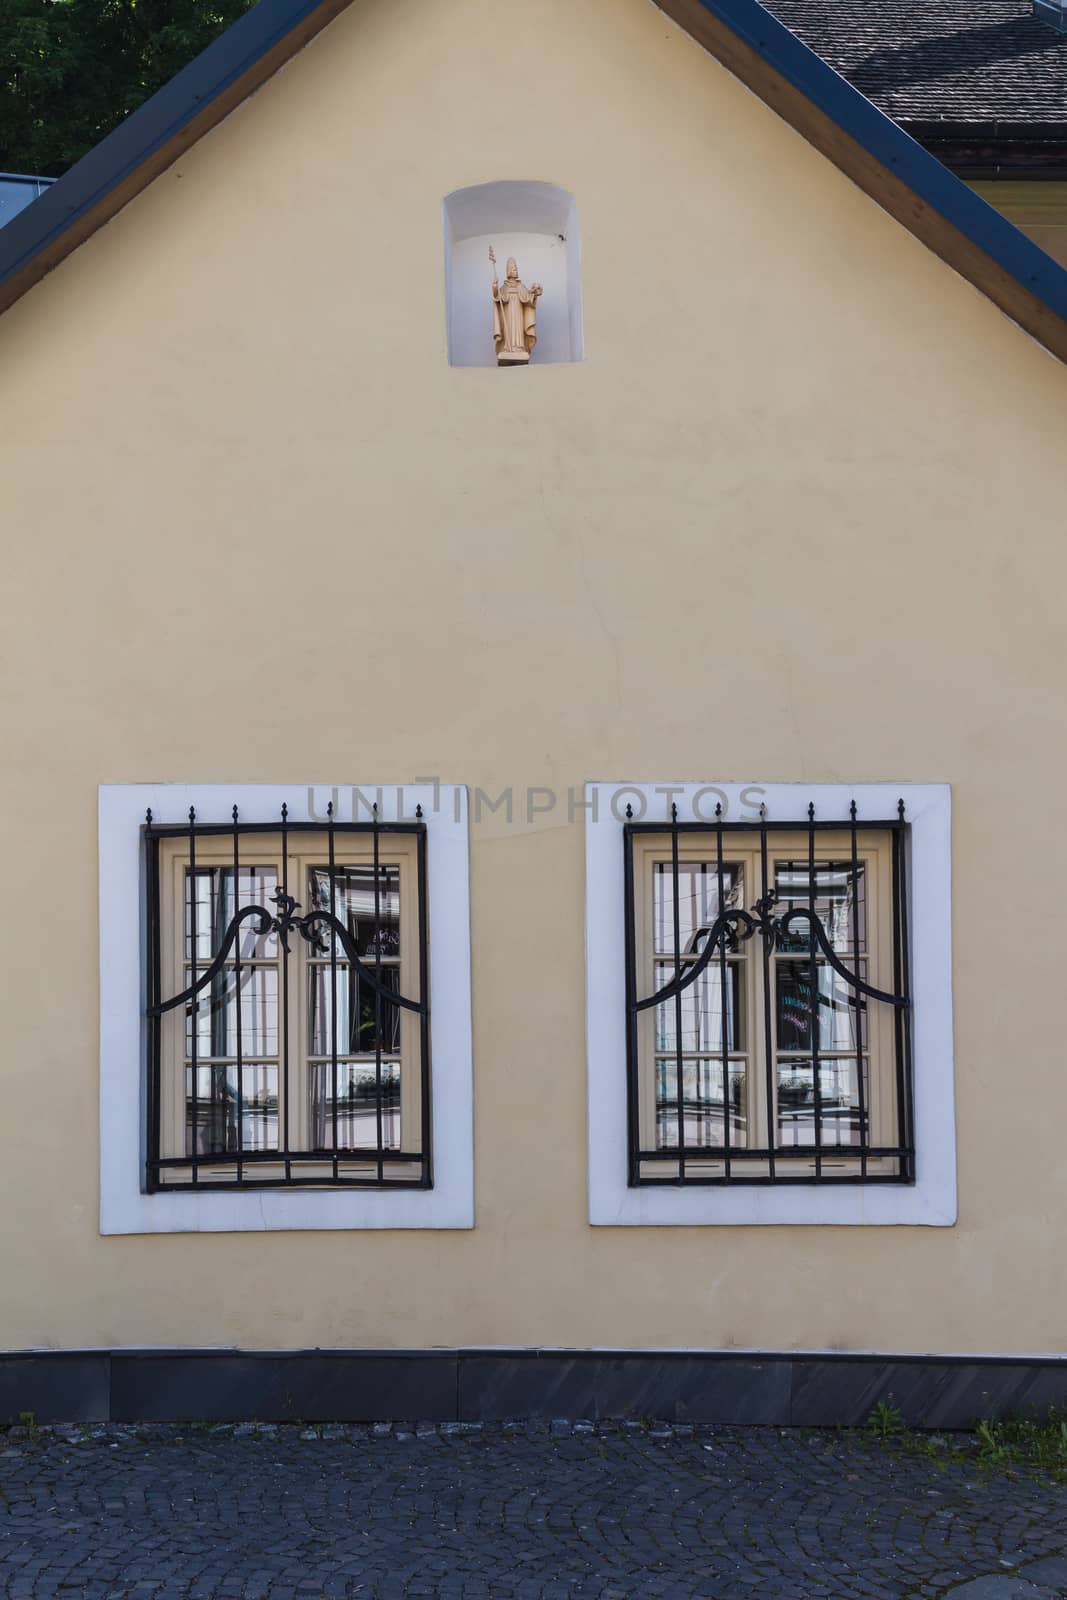 Facade of an old renewed house in medieval city Banska Stiavnica, Slovakia. Two windows with white frames and a saint statue.